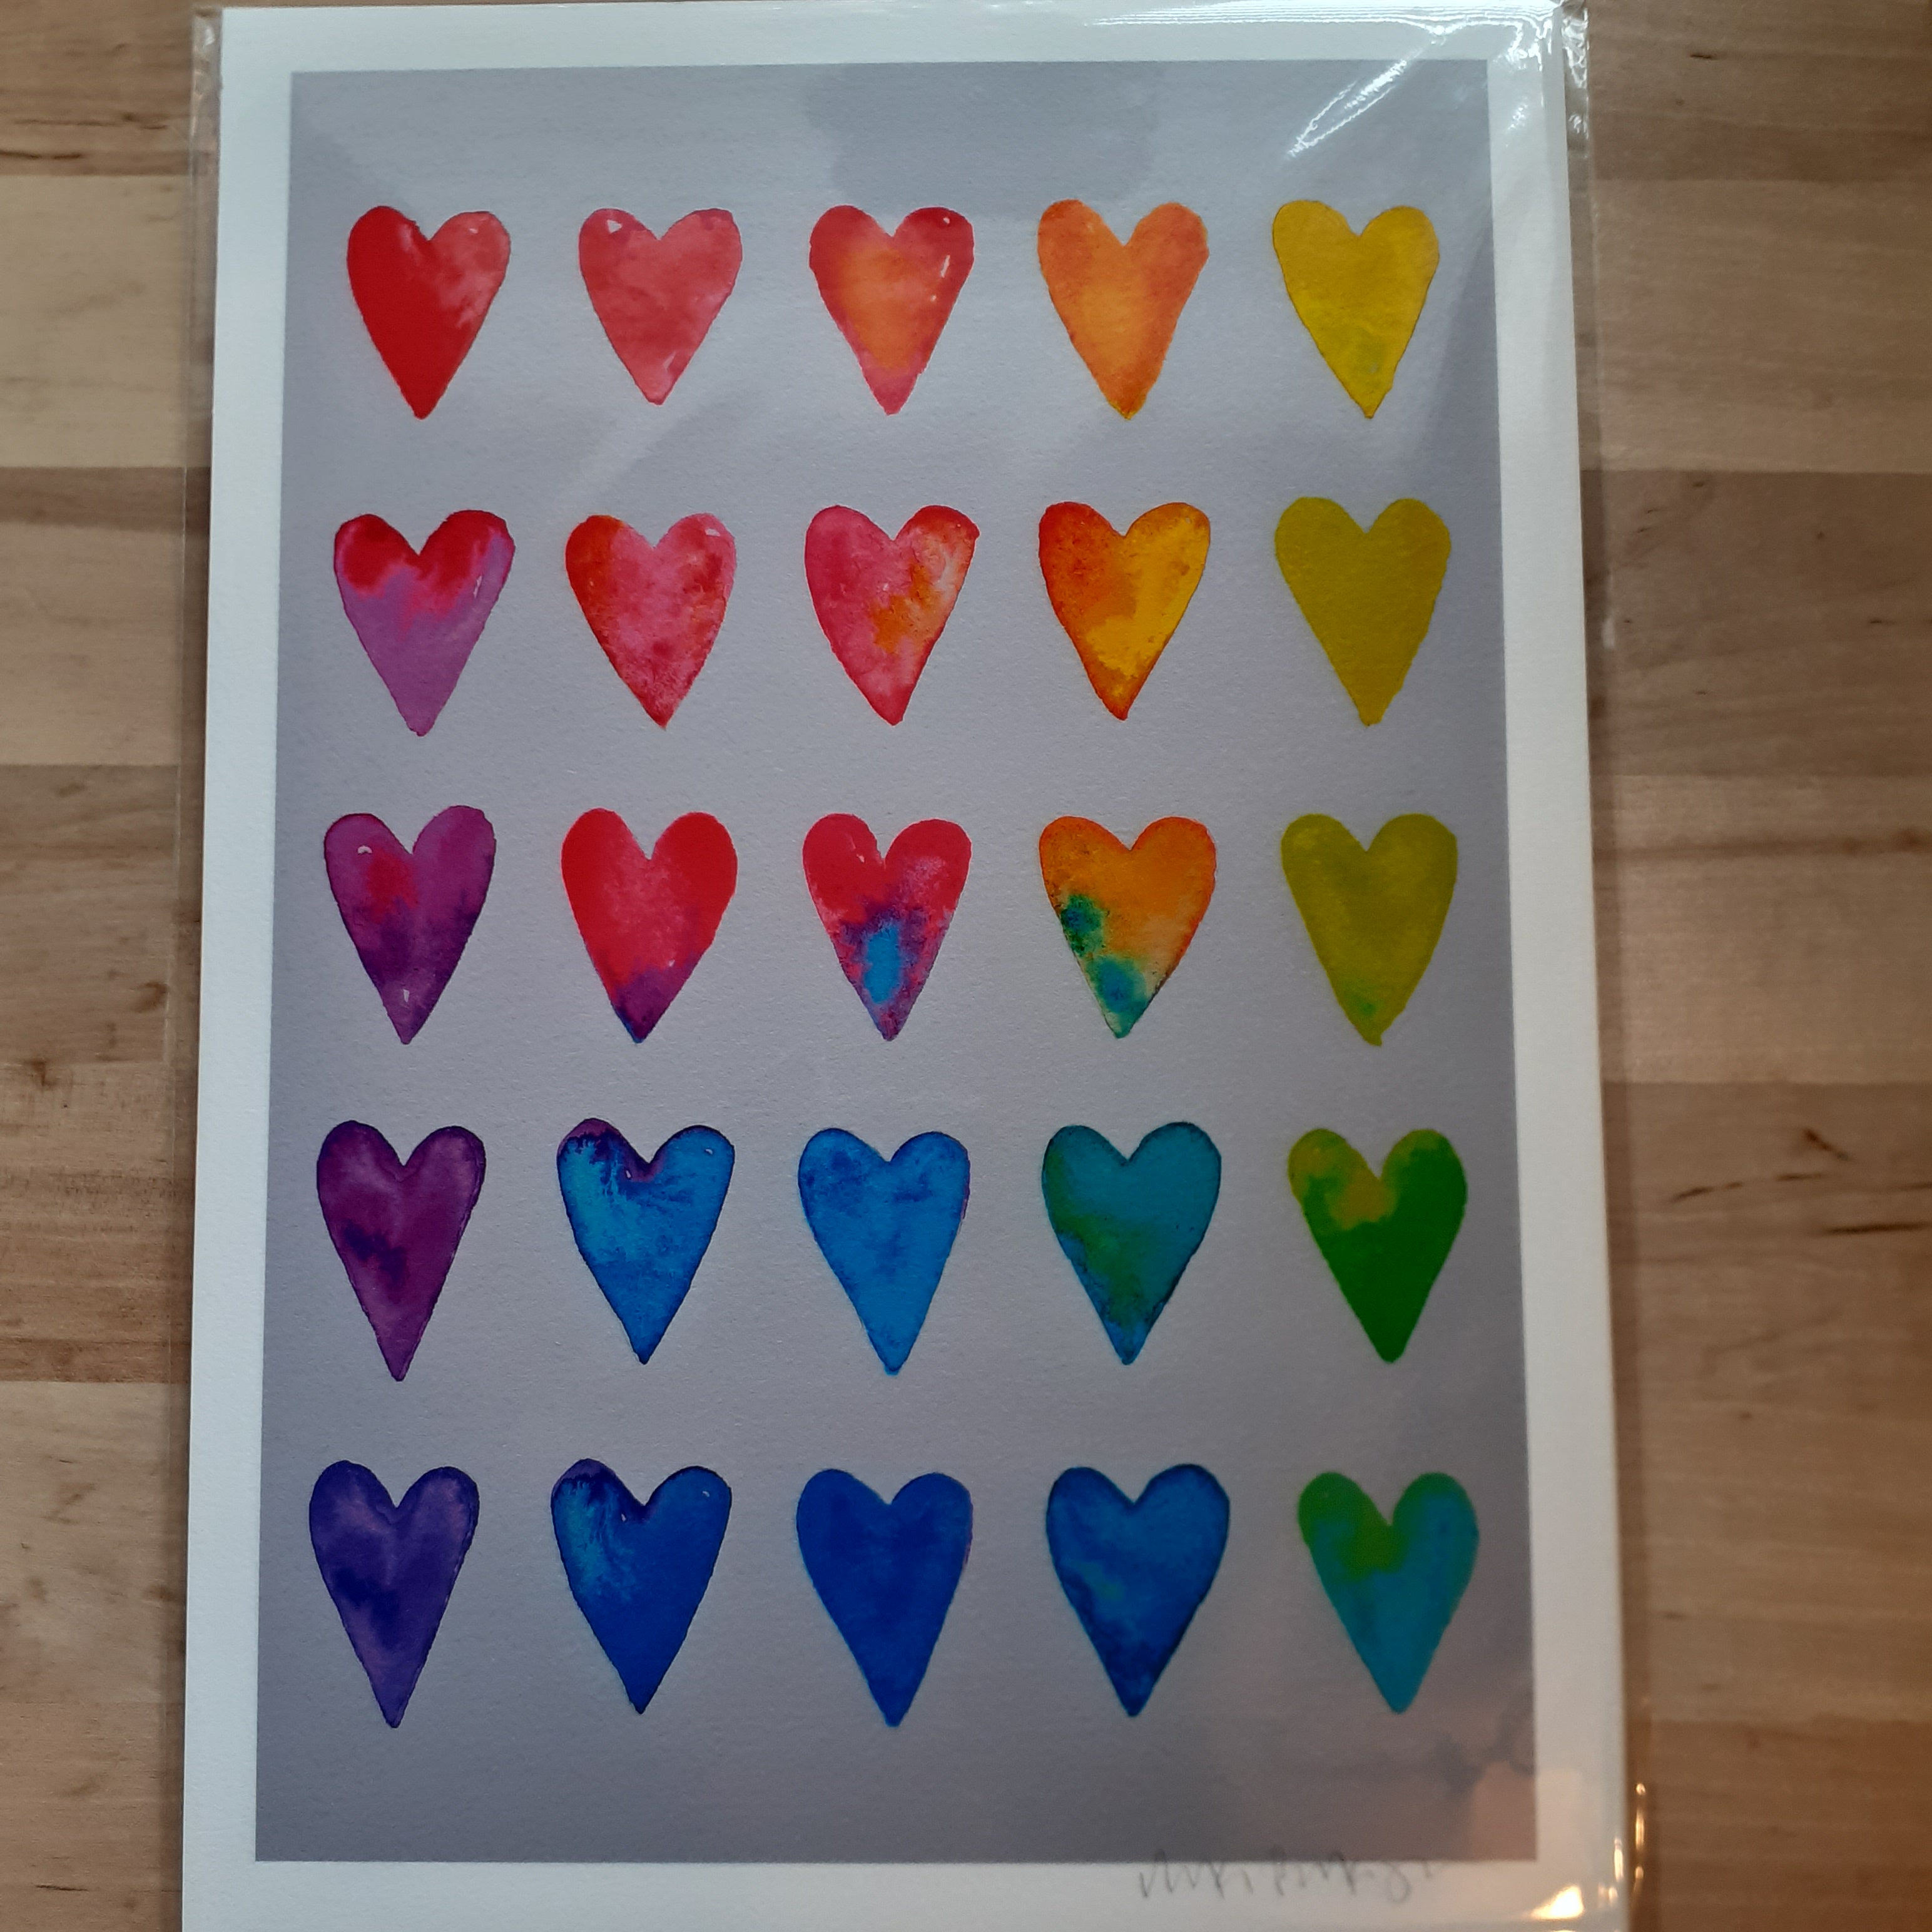 Rainbow Hearts - hand signed A4 Print - Luvit!